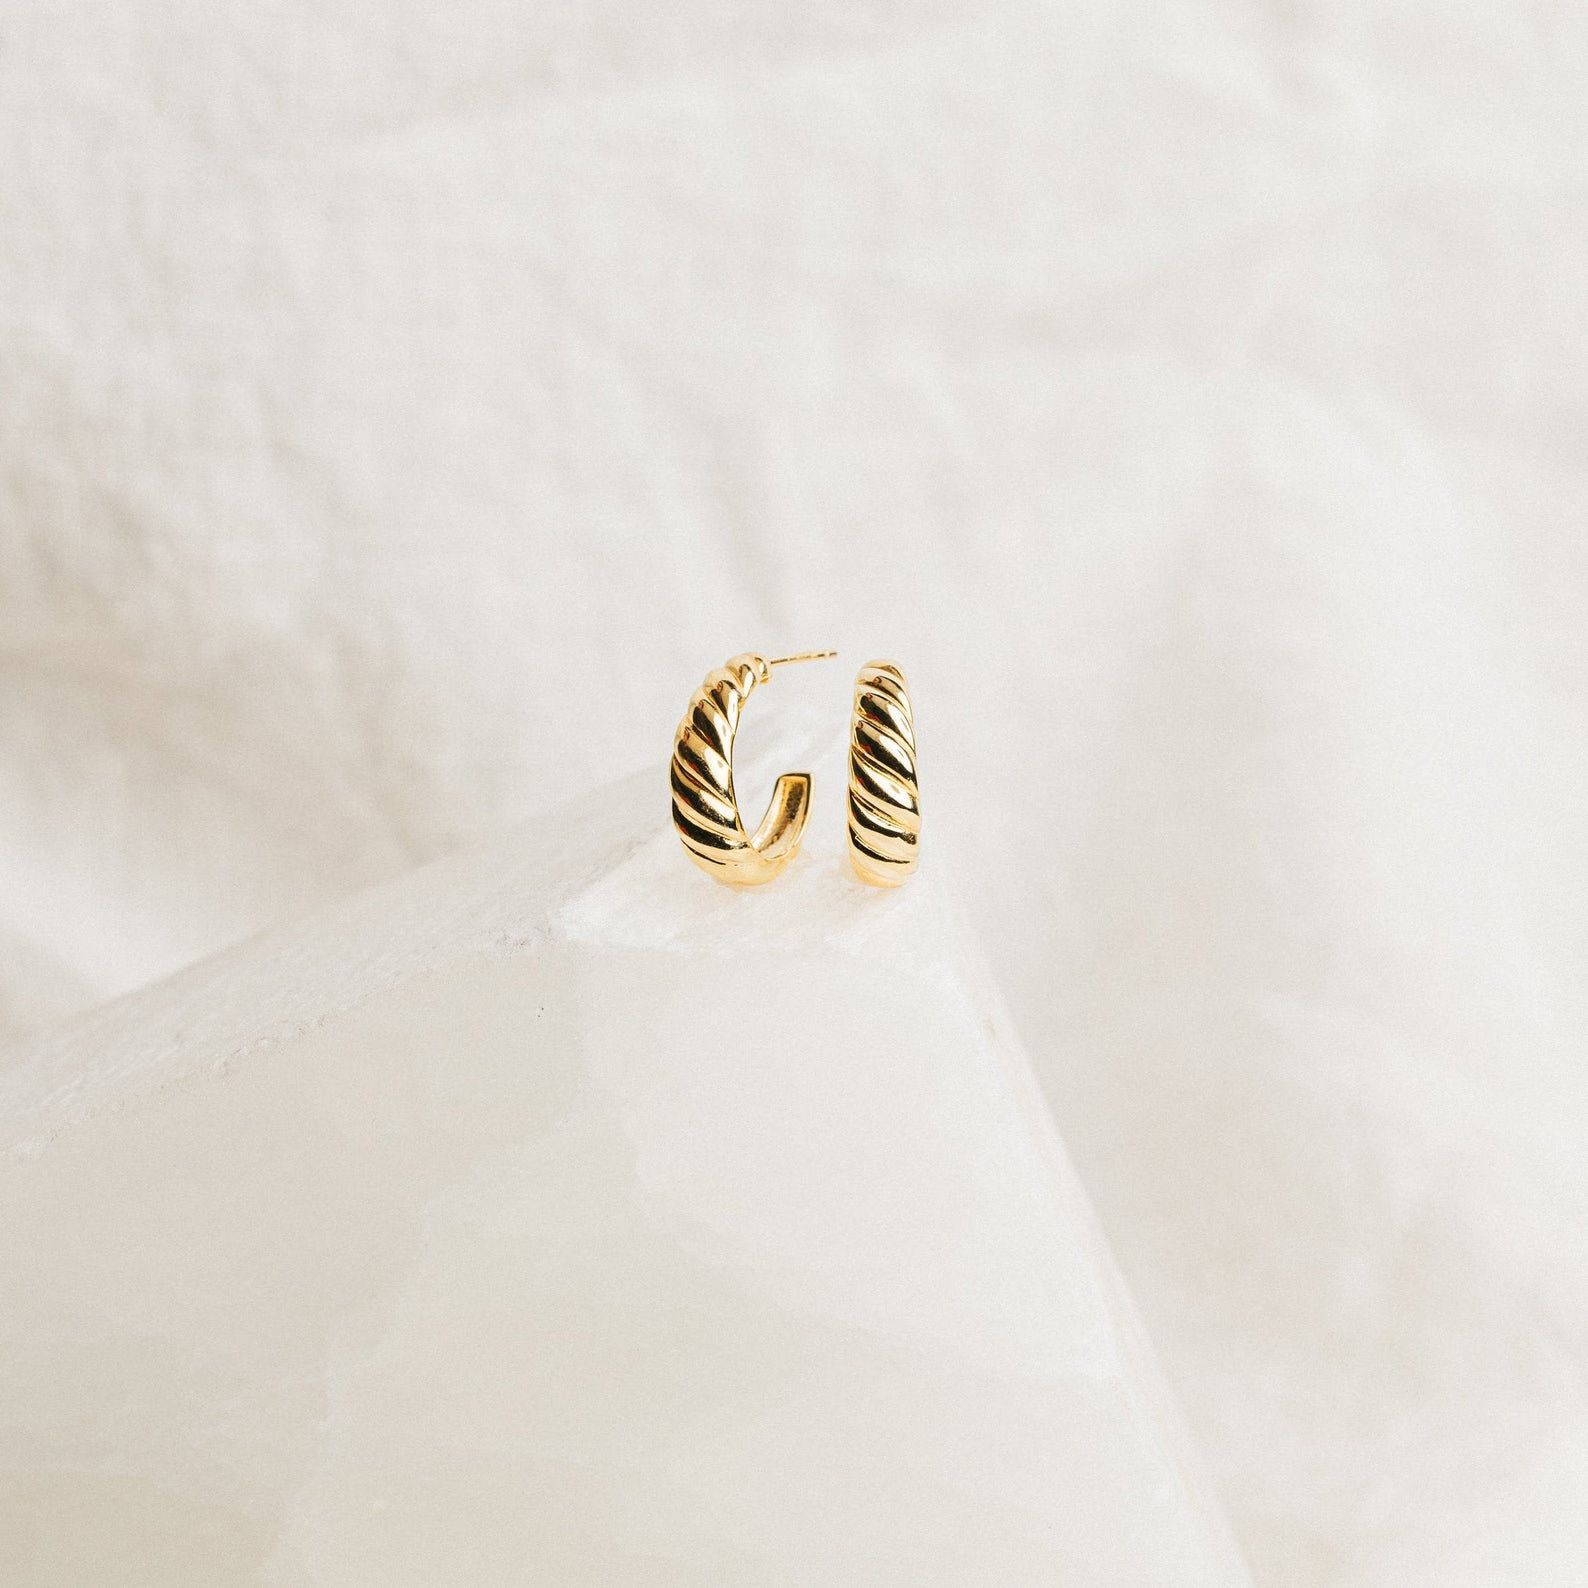 Croissant Hoops in Gold Minimalist Earrings in Sterling Silver Stud Earrings Perfect Gift for Her... | Etsy (US)